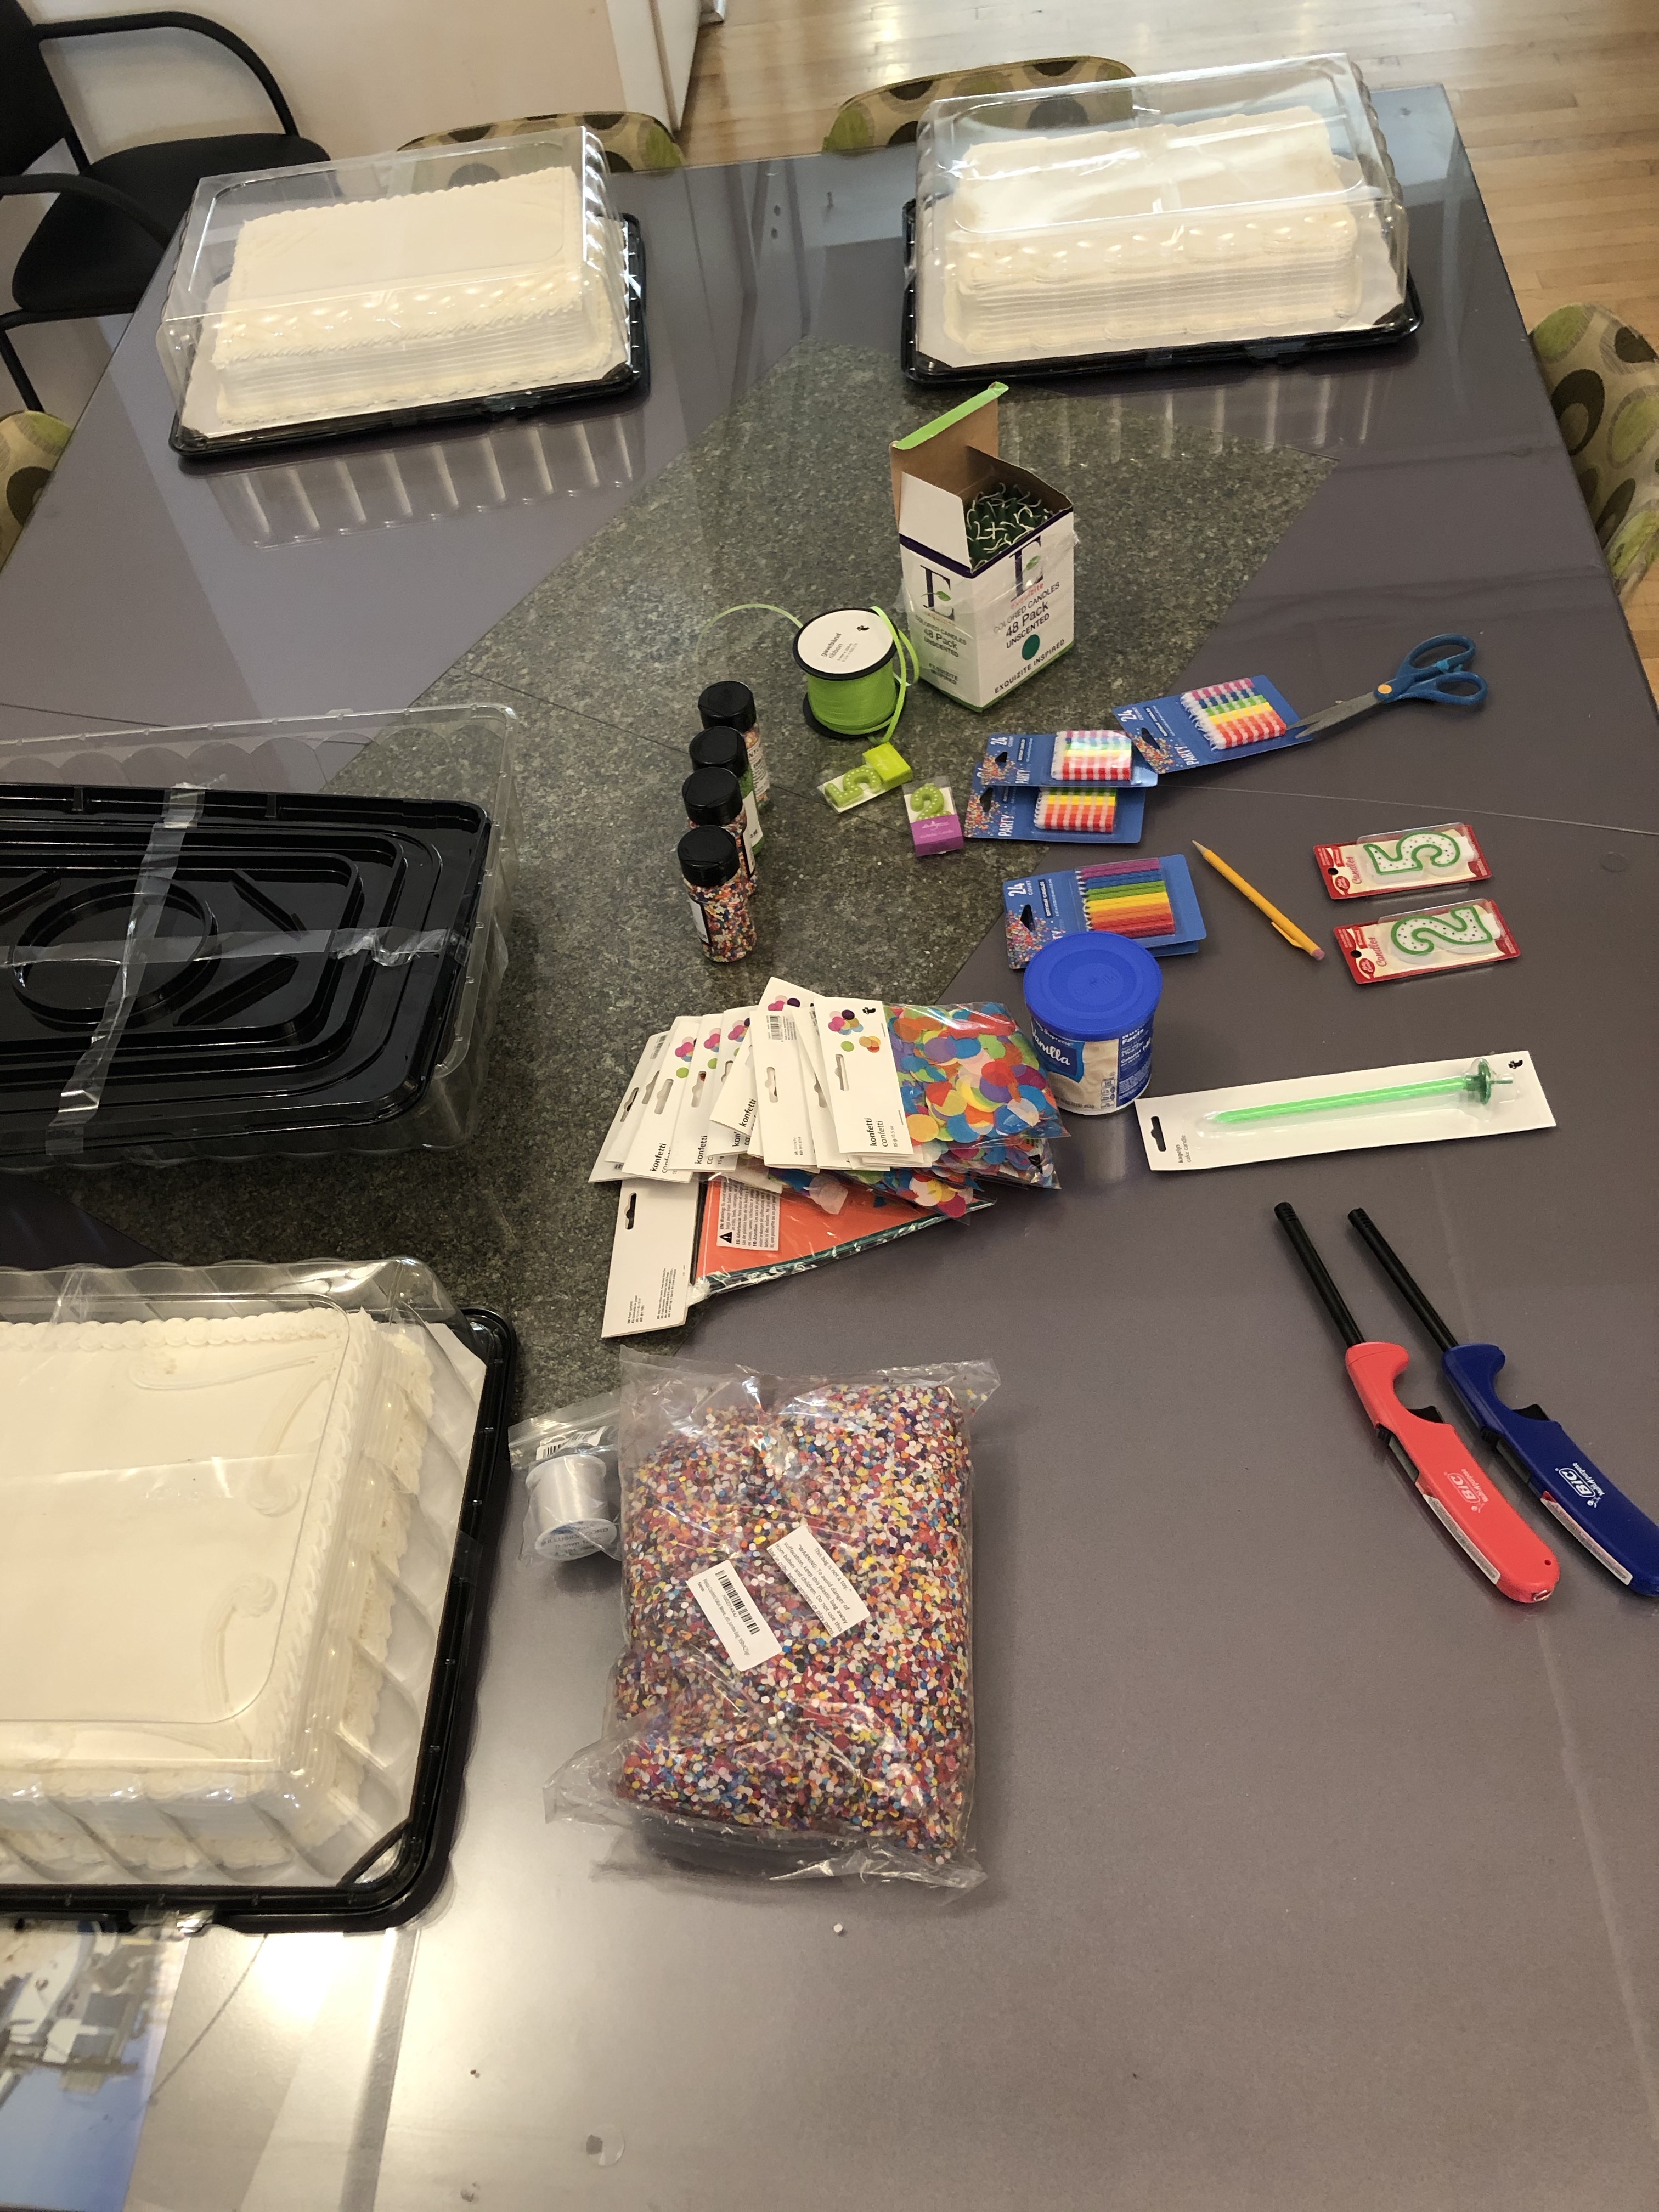 Prepared materials on table